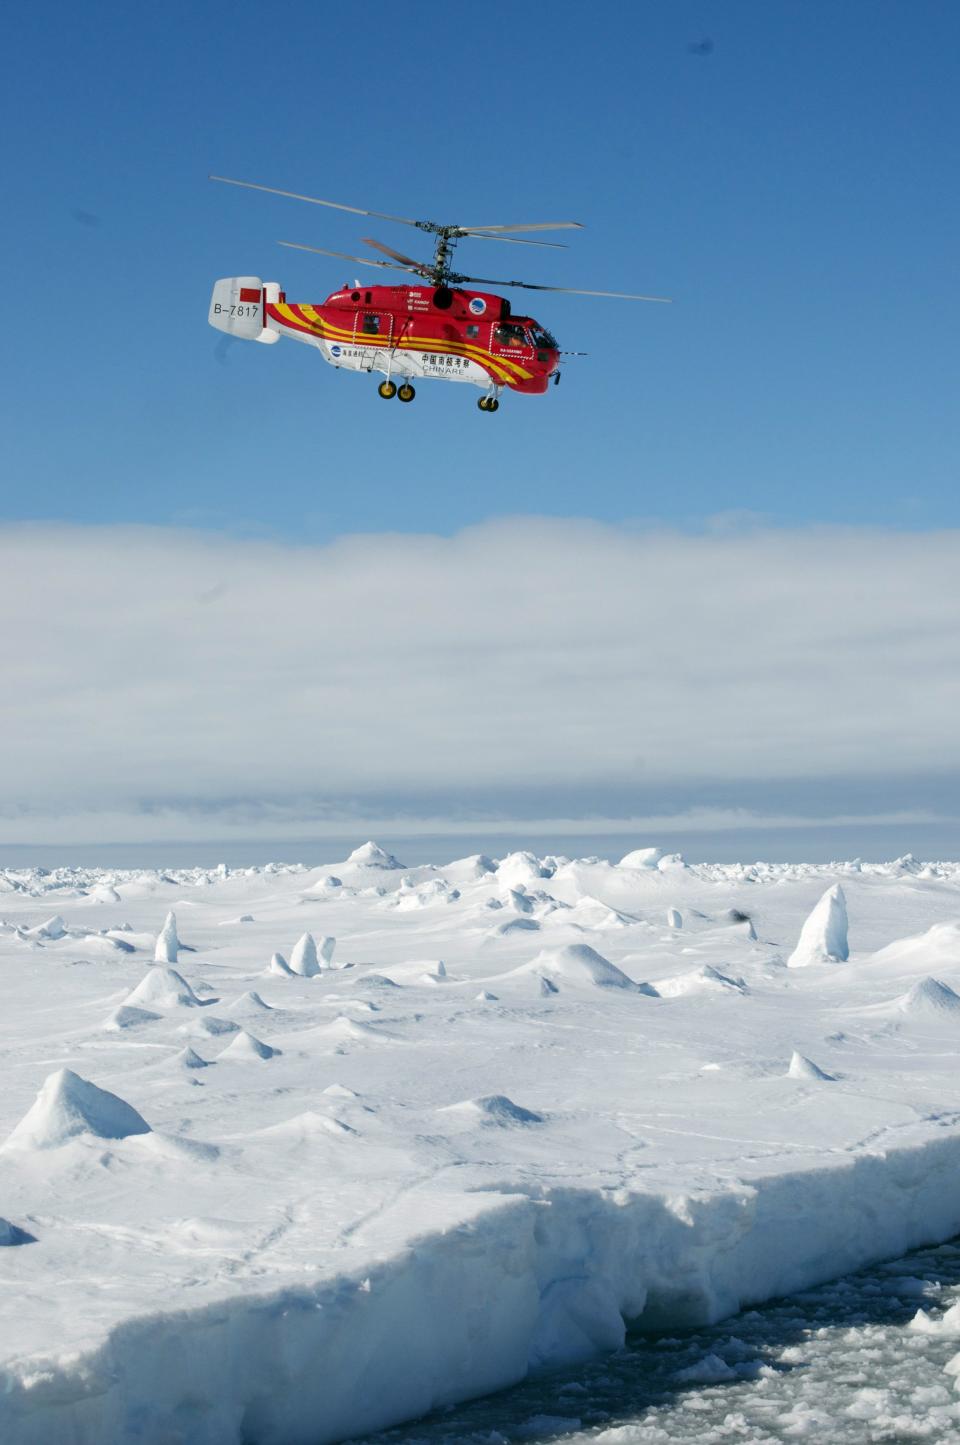 A helicopter from the Xue Long (Snow Dragon) Chinese icebreaker prepares to unload rescued passengers from the ice-bound Russian ship, Akademik Shokalskiy, in East Antarctica, some 100 nautical miles (185 km) east of French Antarctic station Dumont D'Urville and about 1,500 nautical miles (2,800 km) south of Hobart, Tasmania, January 2, 2014, in this handout courtesy of Fairfax's Australian Antarctic Division. A rescue effort to remove 52 passengers on board a research ship that had been trapped in Antarctica ice for nine days was successful, and they were evacuated safely by helicopter, the expedition leader said on Thursday. A helicopter from the Chinese icebreaker Snow Dragon ferried the passengers in small groups several times from the Russian ship and transferred them to an Australian Antarctic supply ship, the Aurora Australis. Picture taken January 2, 2014. REUTERS/Fairfax/Australian Antarctic Division/Handout via Reuters (ANTARCTICA - Tags: ENVIRONMENT DISASTER) NO SALES. NO ARCHIVES. FOR EDITORIAL USE ONLY. NOT FOR SALE FOR MARKETING OR ADVERTISING CAMPAIGNS. THIS IMAGE HAS BEEN SUPPLIED BY A THIRD PARTY. IT IS DISTRIBUTED, EXACTLY AS RECEIVED BY REUTERS, AS A SERVICE TO CLIENTS